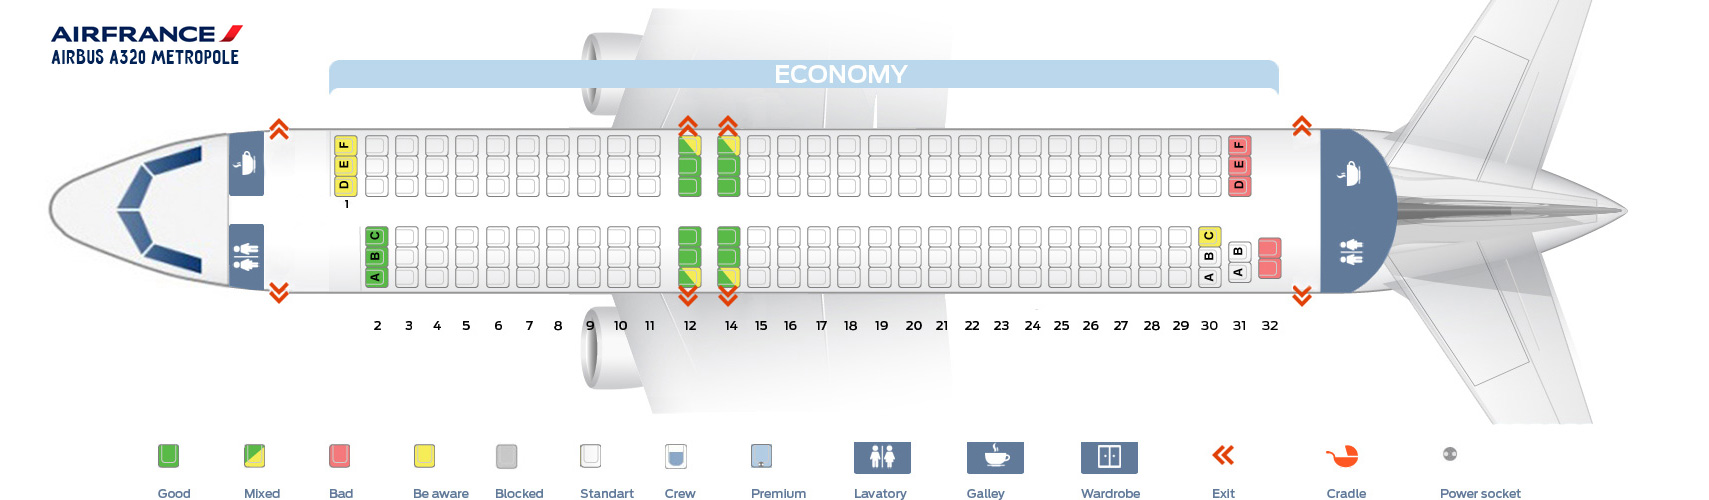 Frontier Airlines Seating Chart Airbus A320